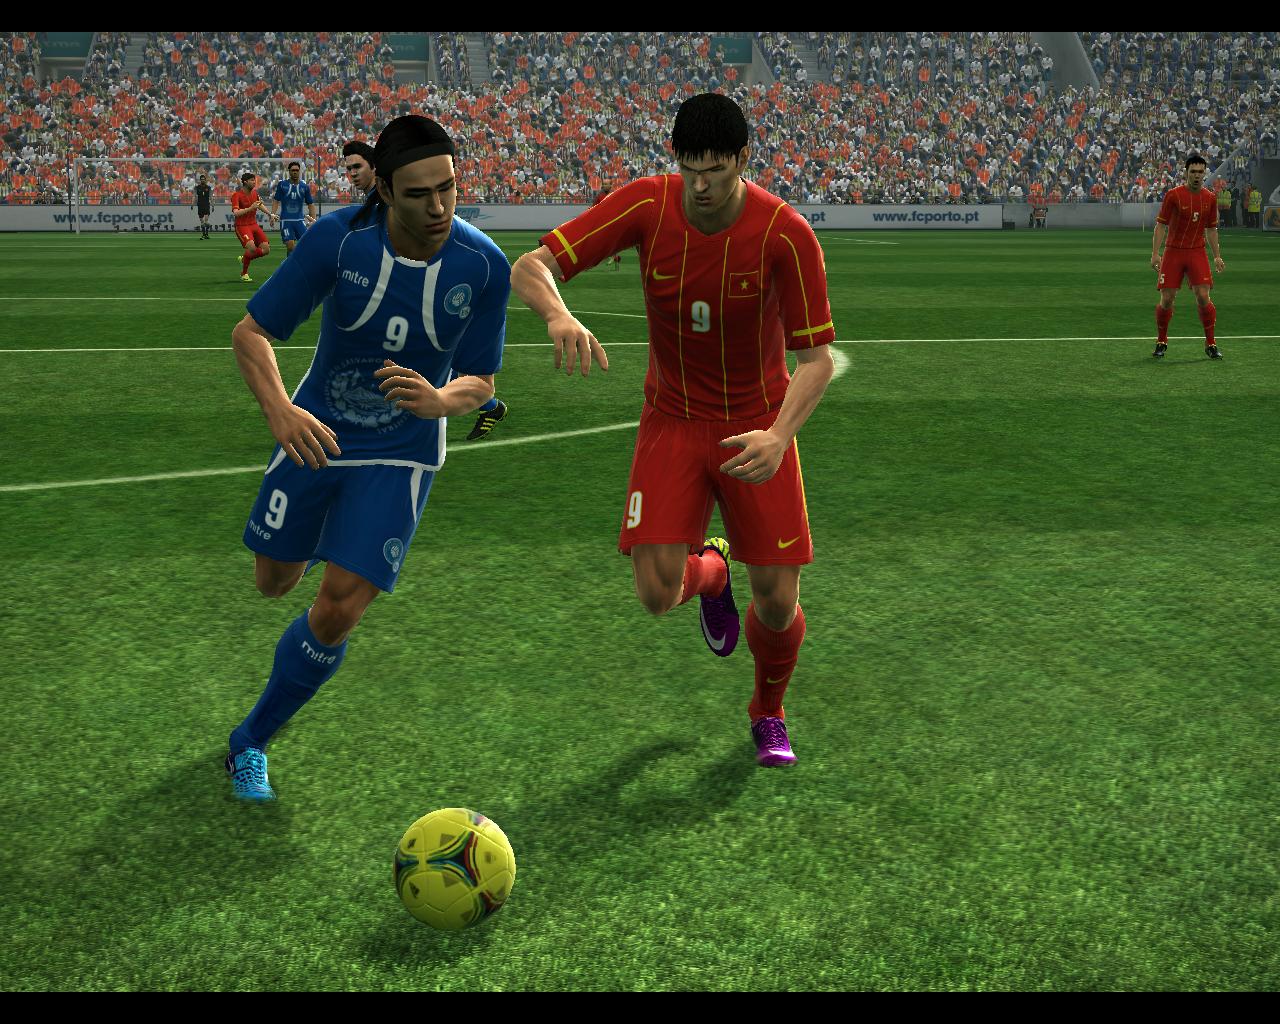 PES 2012 All National Teams Patch 2012 + Update by Boca & Tottimas ~